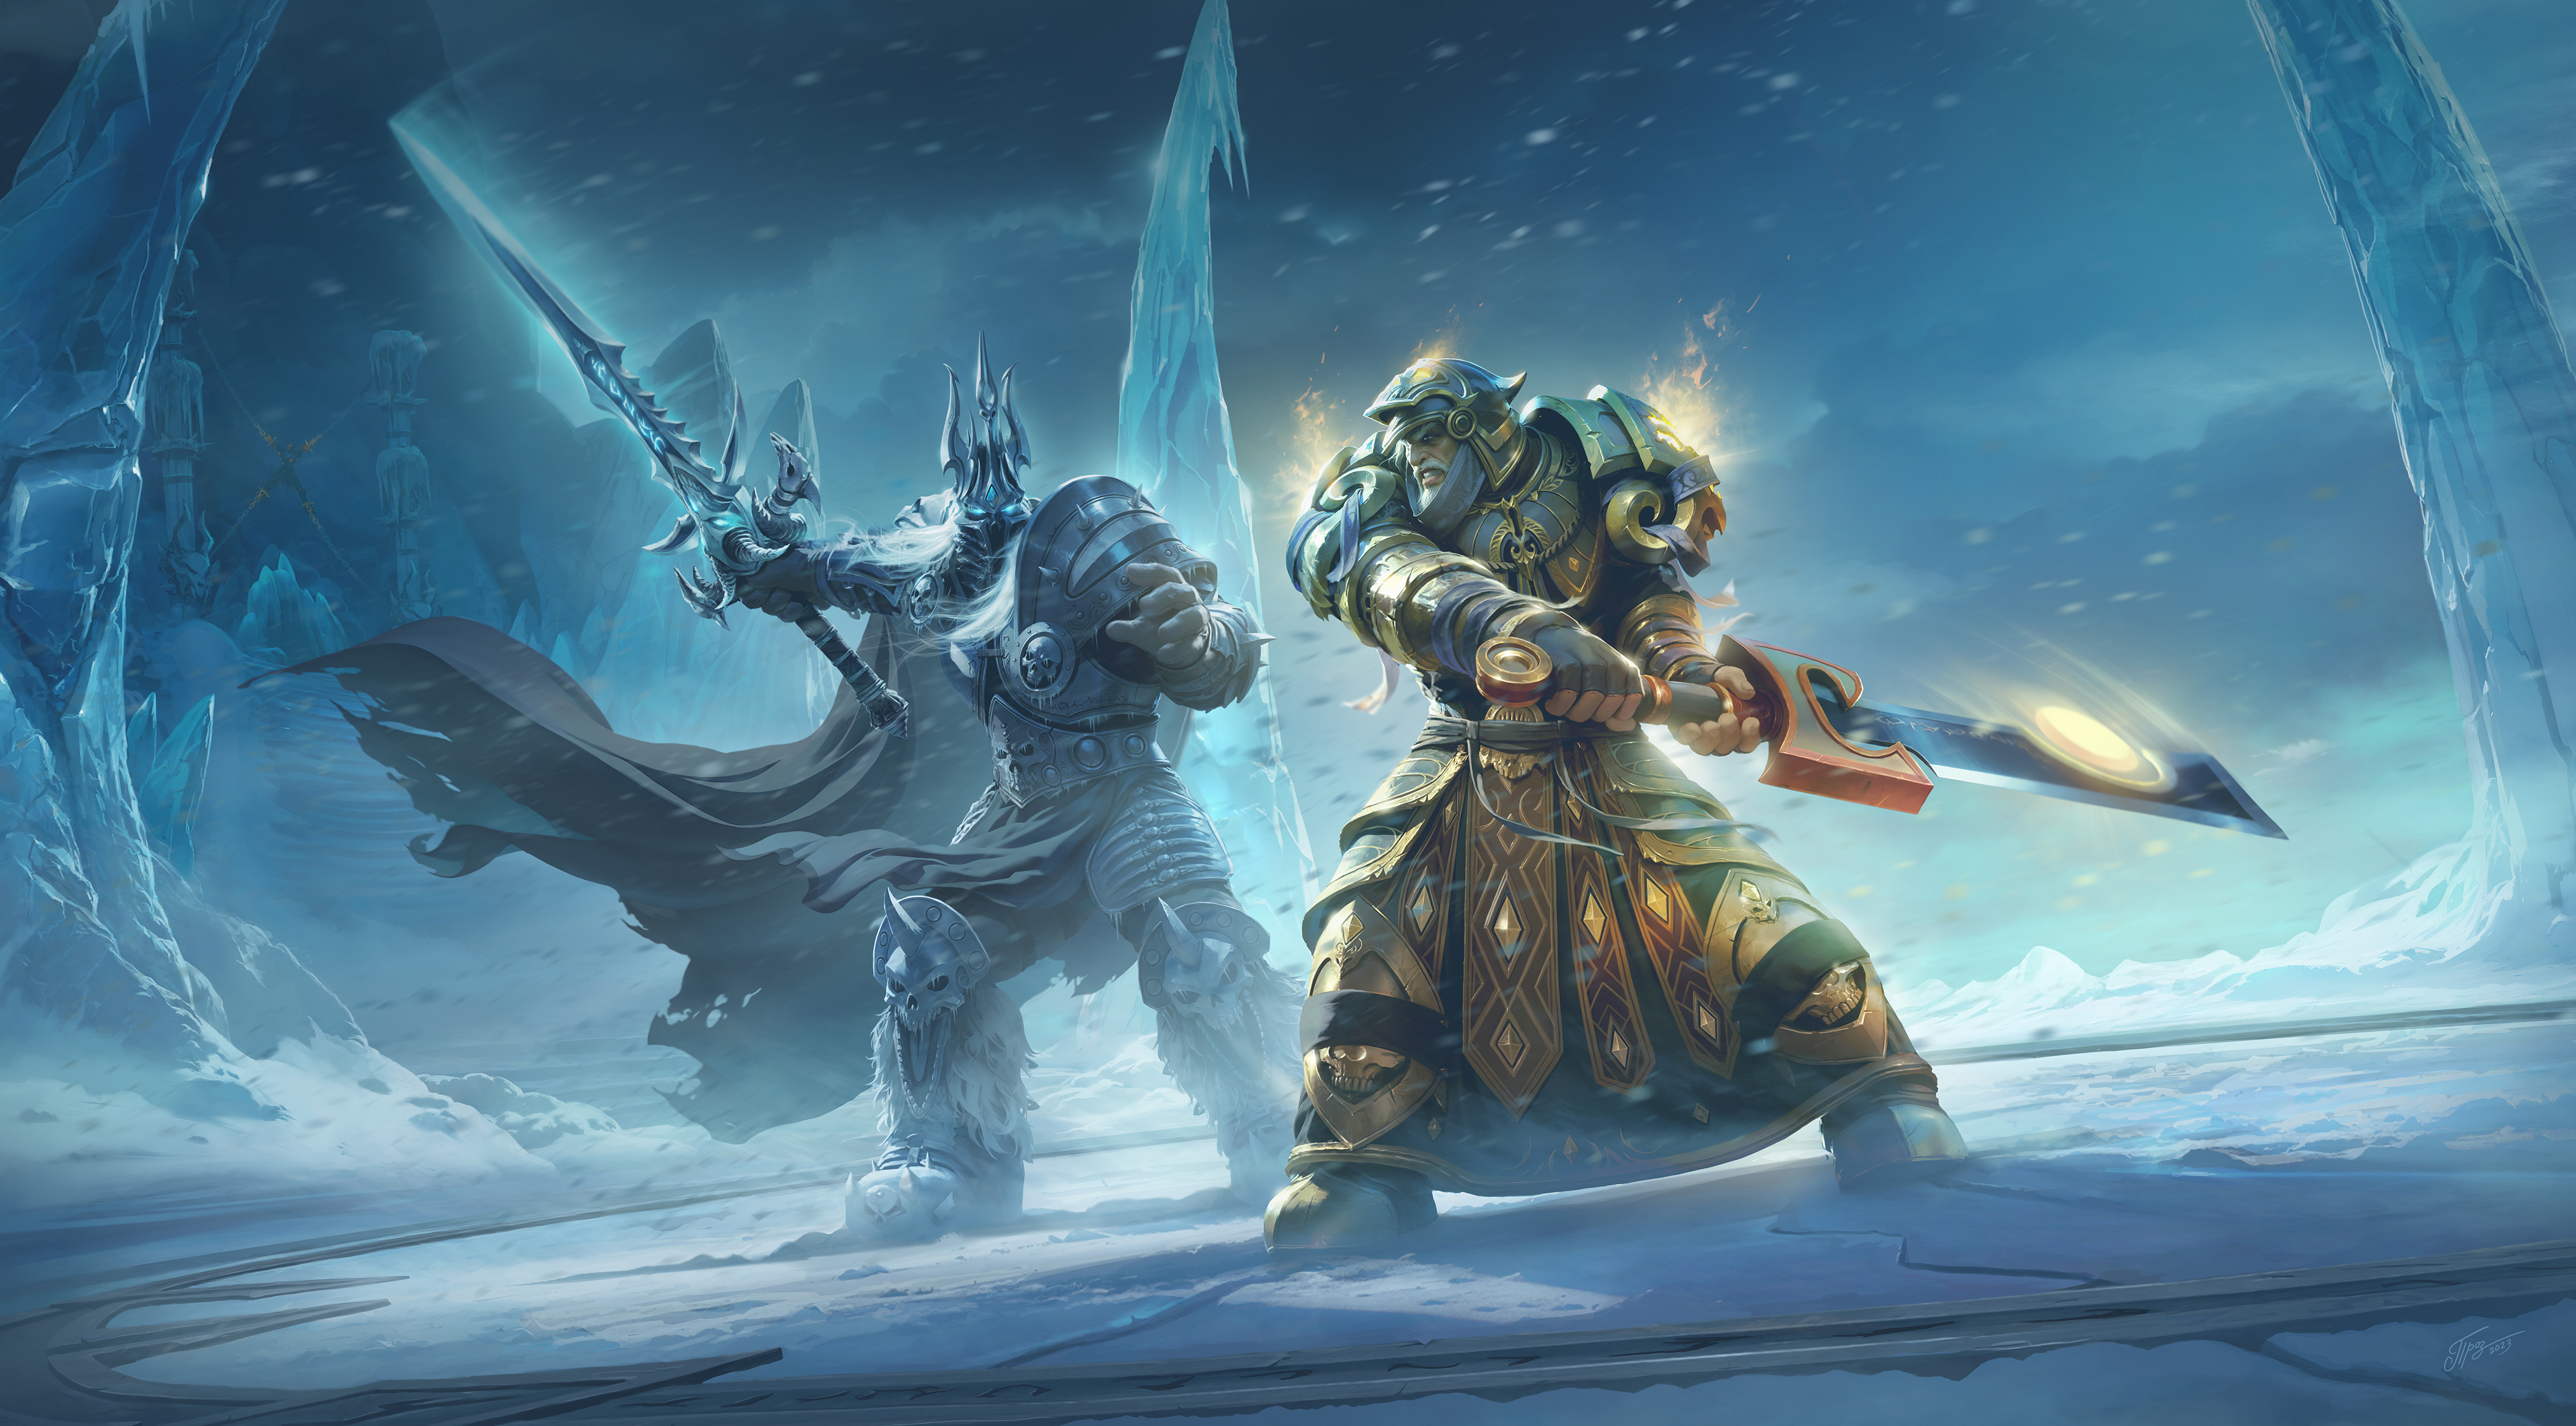 Dmitry Prozorov Drawing Warcraft The Lich King Tirion Fordring Fighting 4285x2372